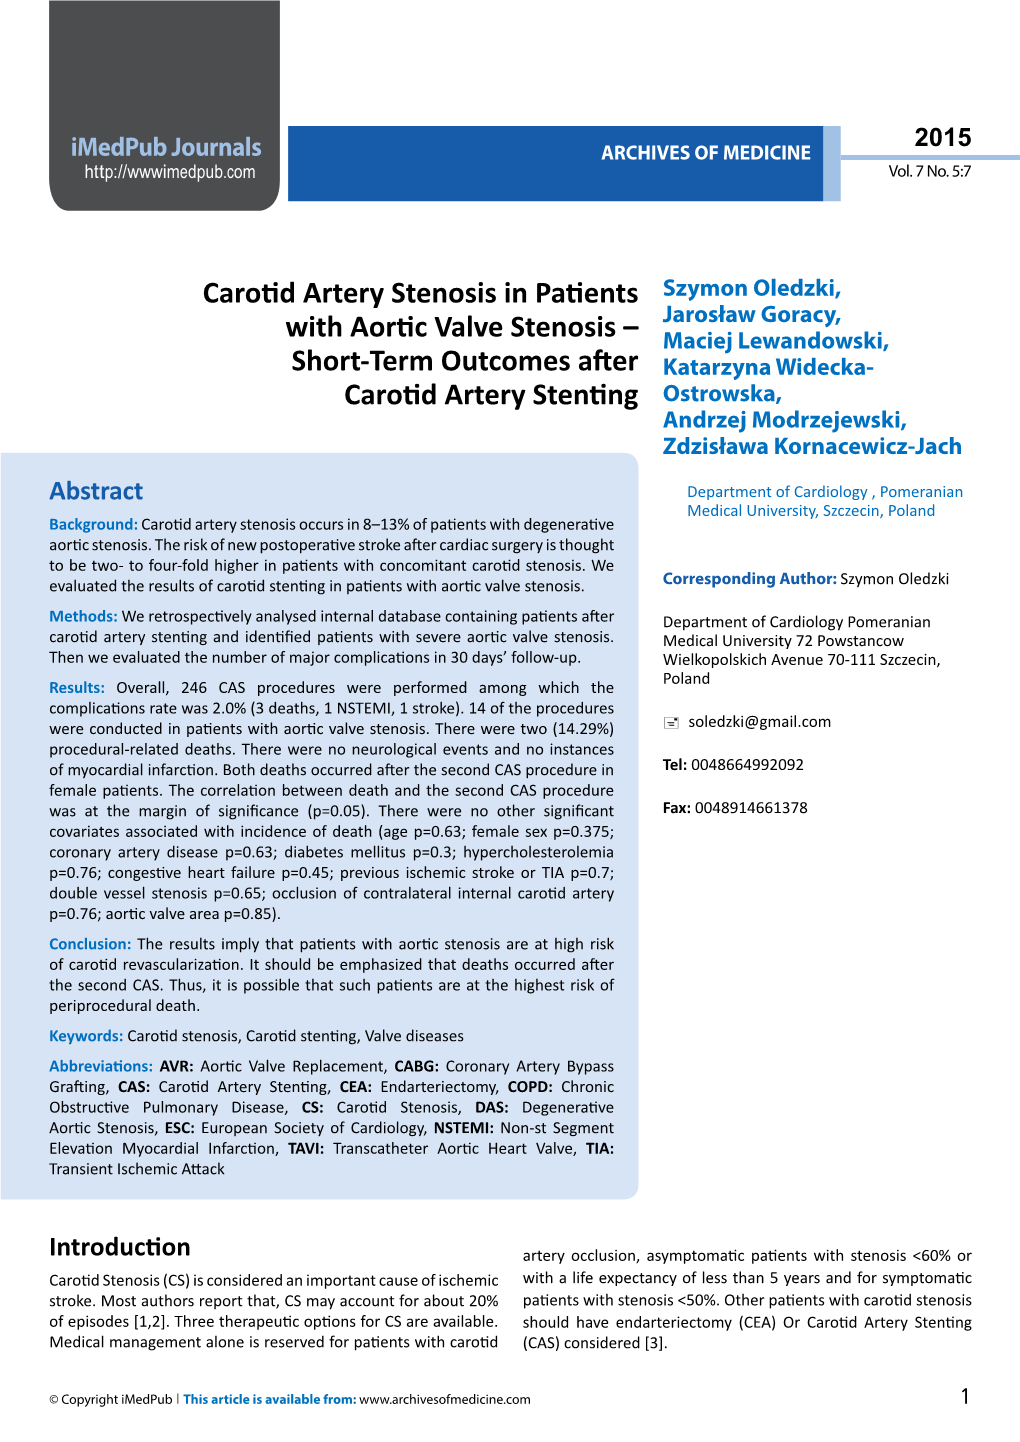 Short-Term Outcomes After Carotid Artery Stenting